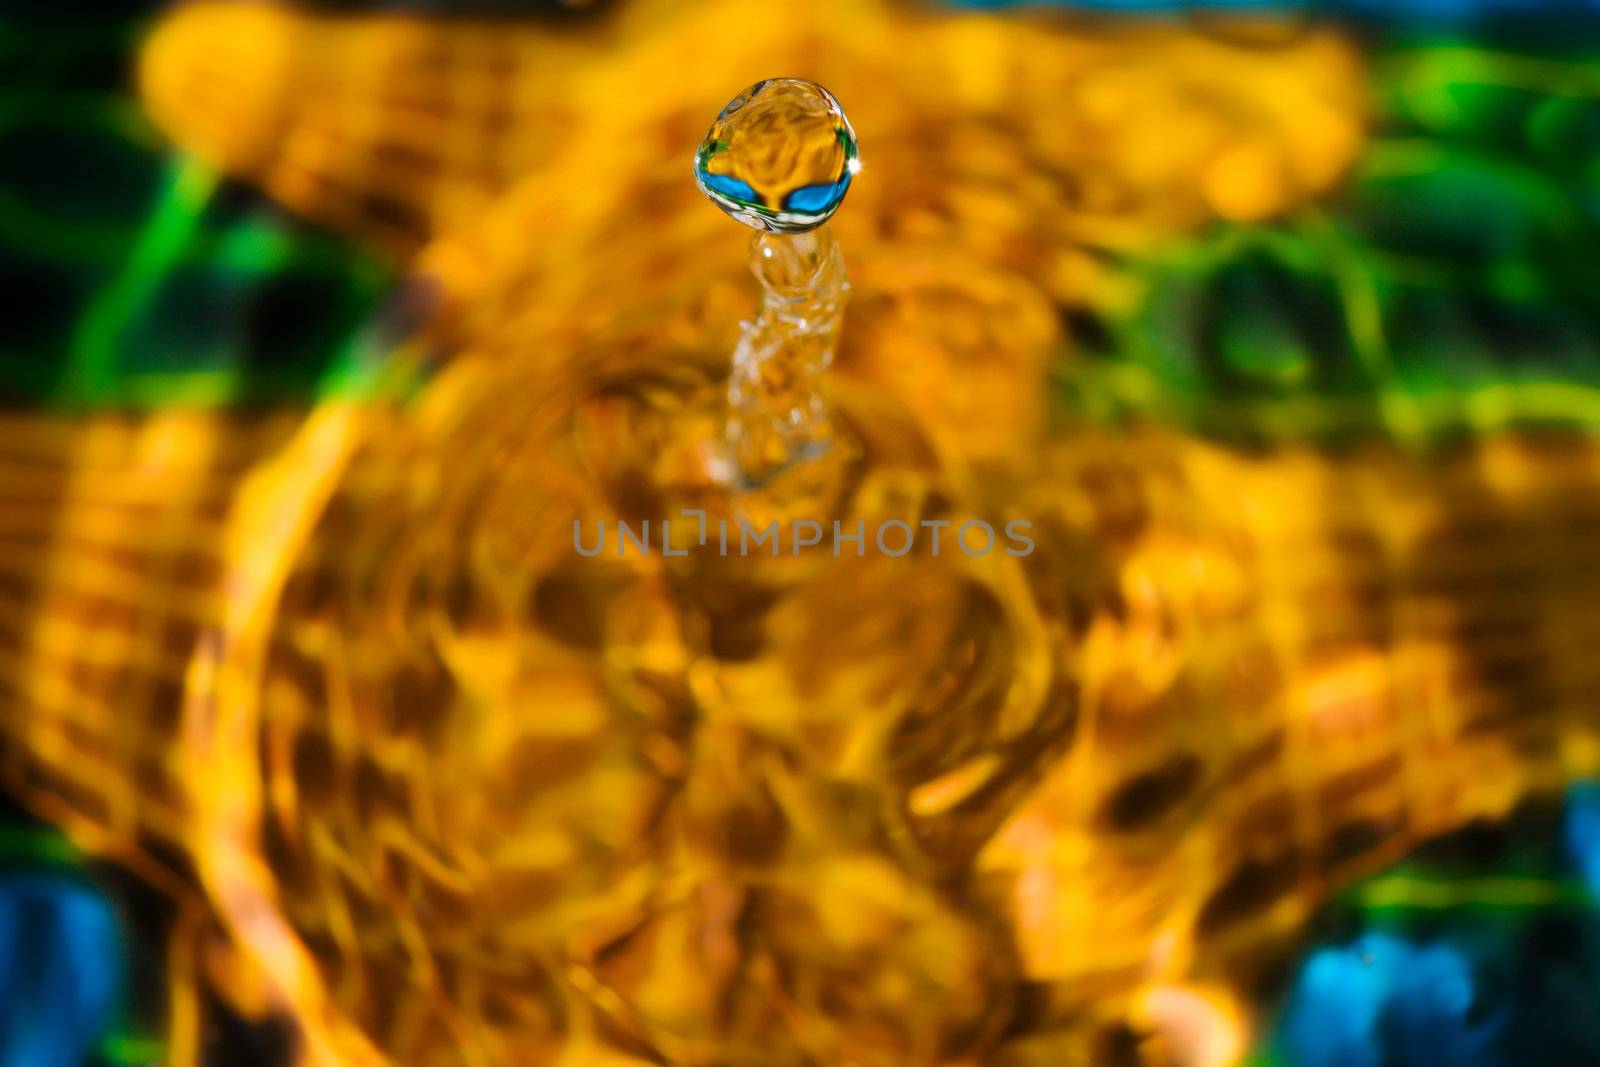 Close ups of water drop sculptures on a colorful background.